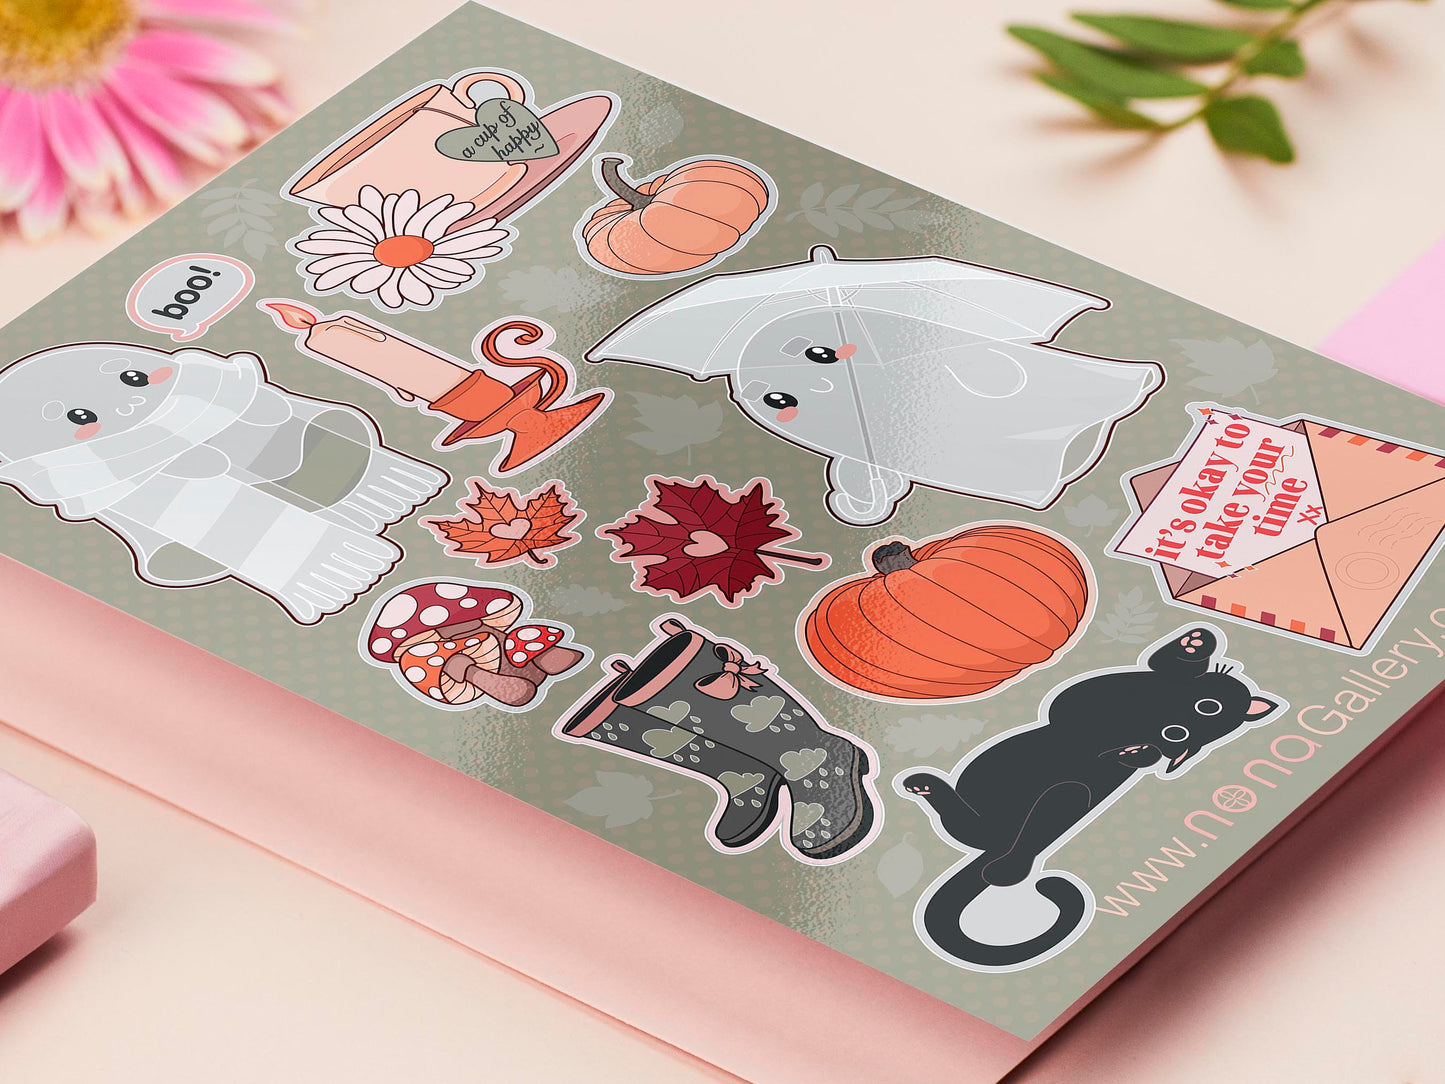 Large sticker sheet of digital illustration cartoon of ghosts, mushrooms, leaves, pumpkins, tea, wellington boots, black cats and other assorted autumn items 